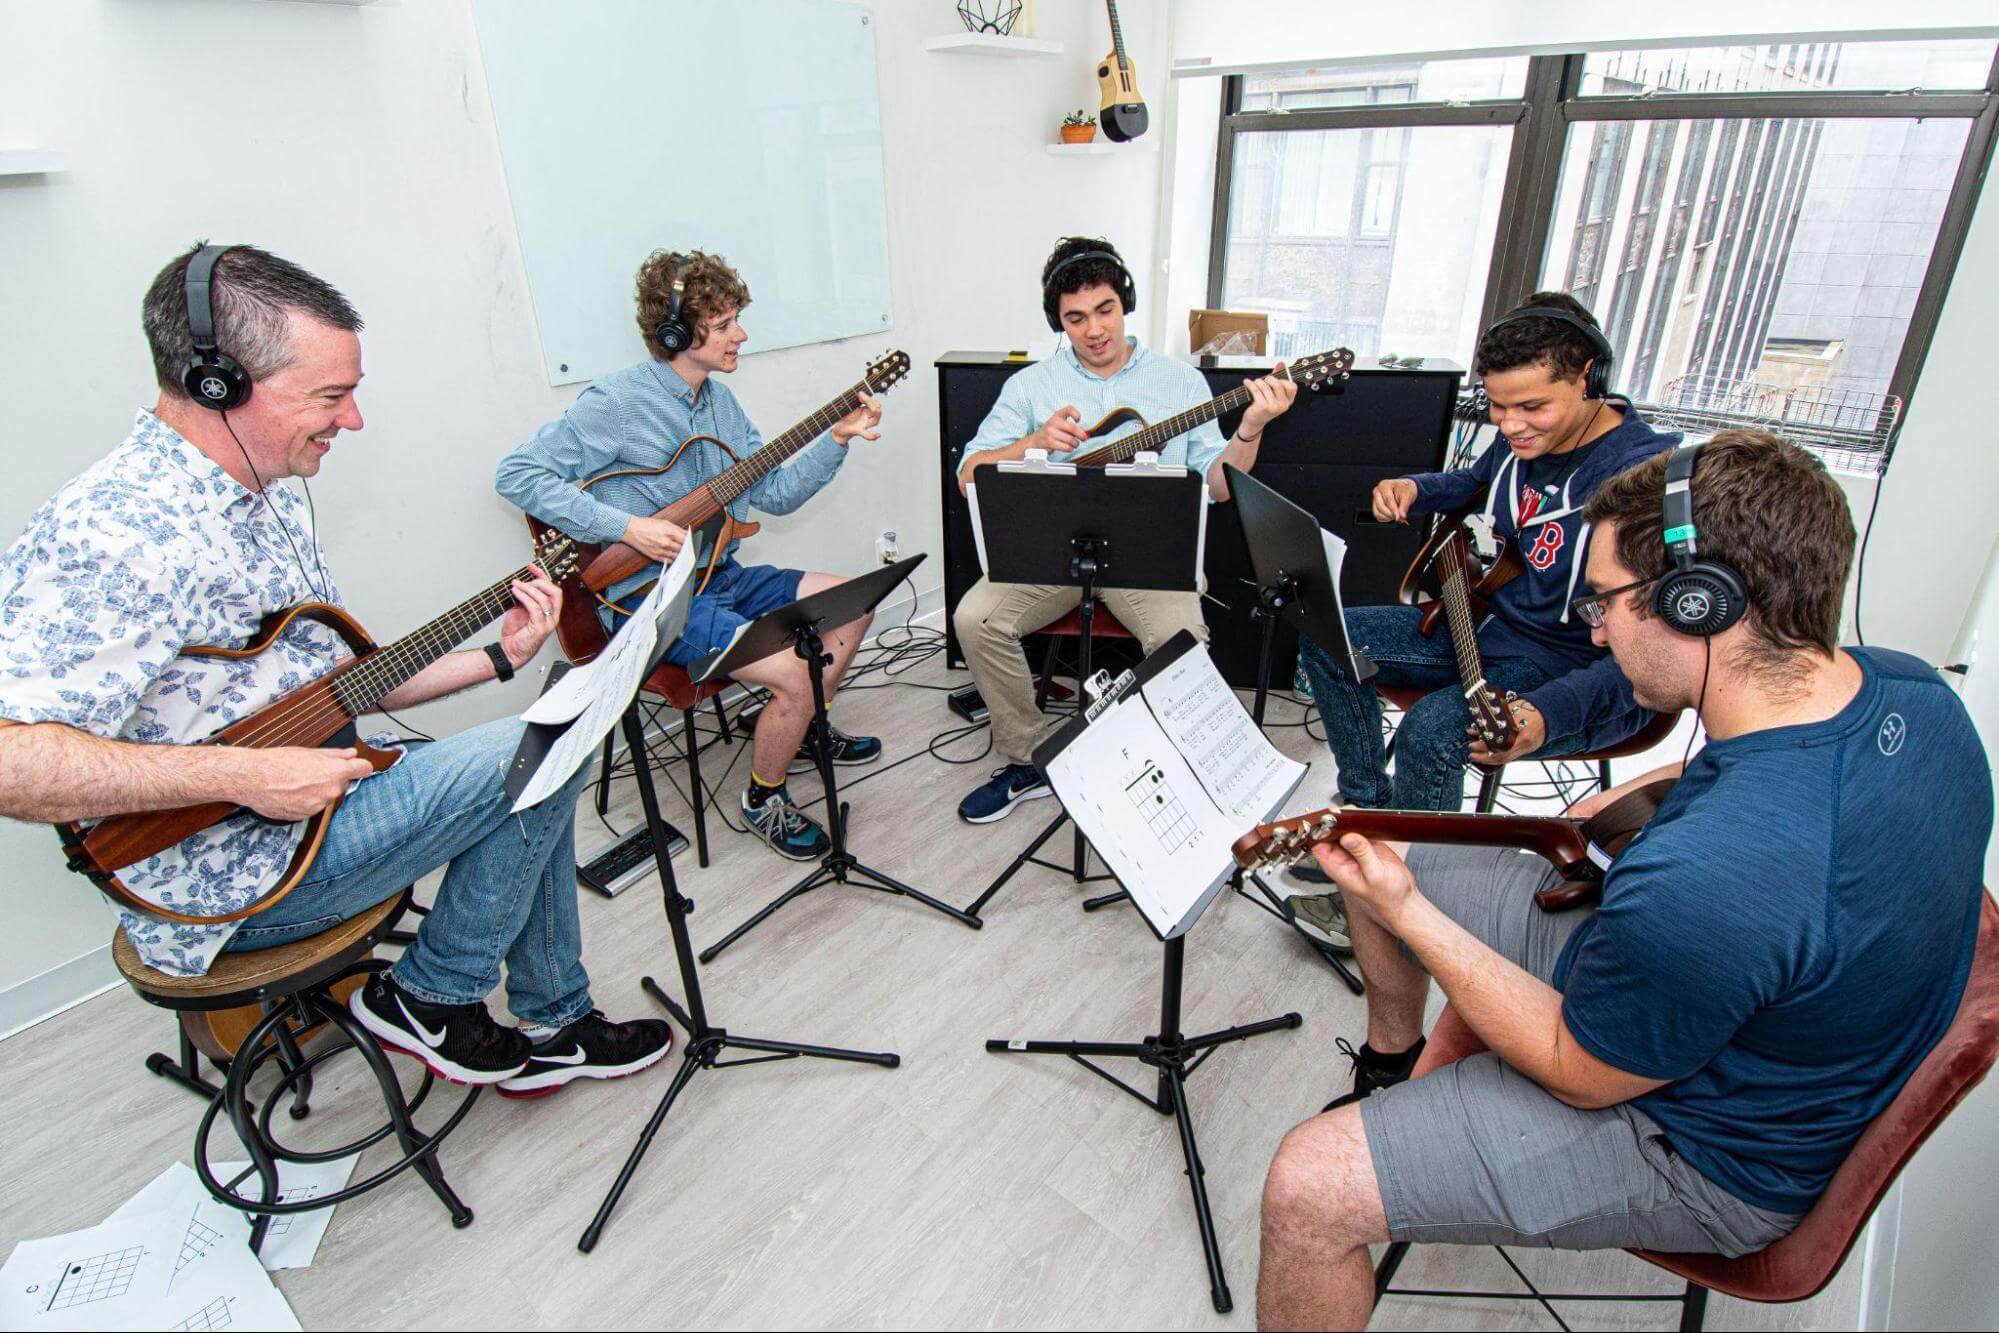 Adult music students learning acoustic guitar in group lesson at music school in Boston MA